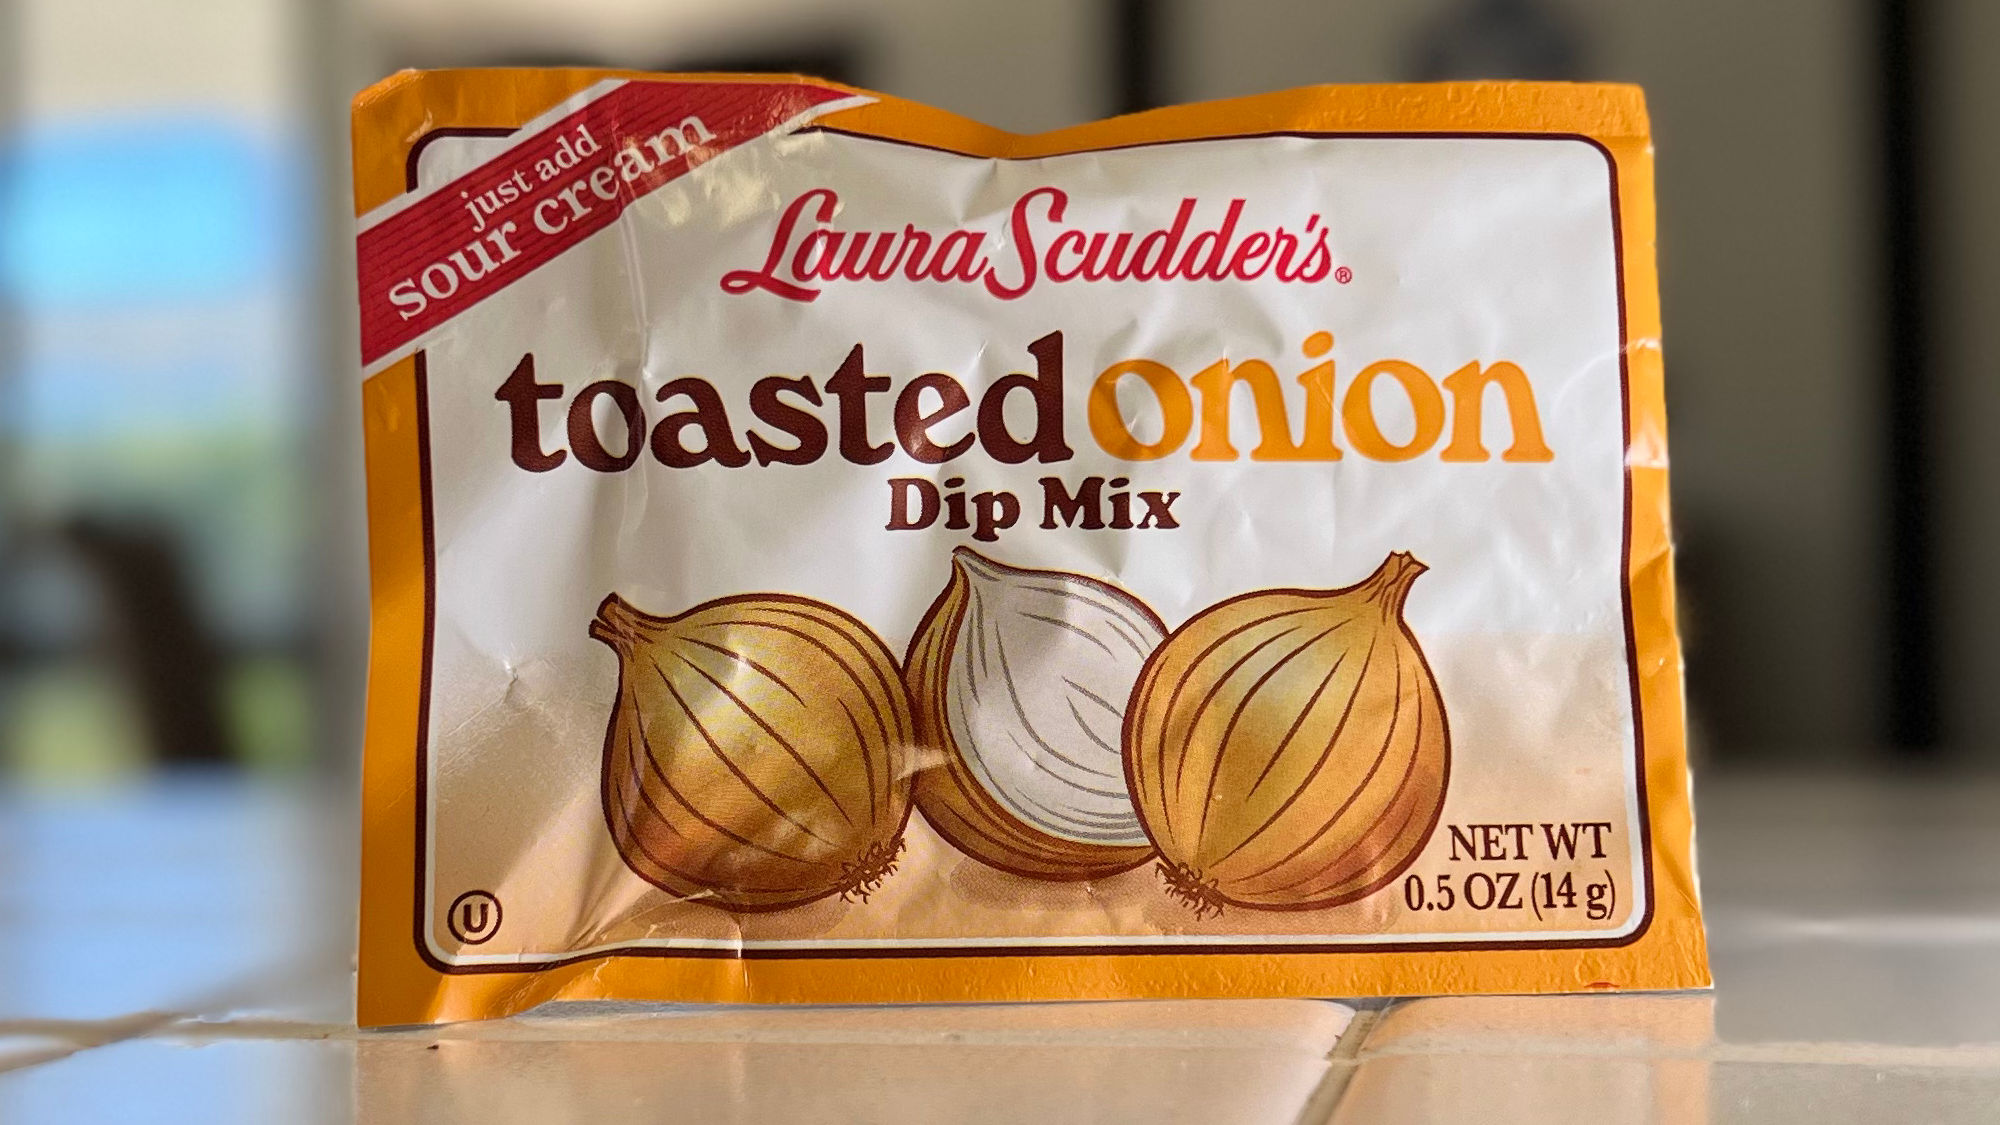 Toasted Onion Dip Mix Laura Scudder's